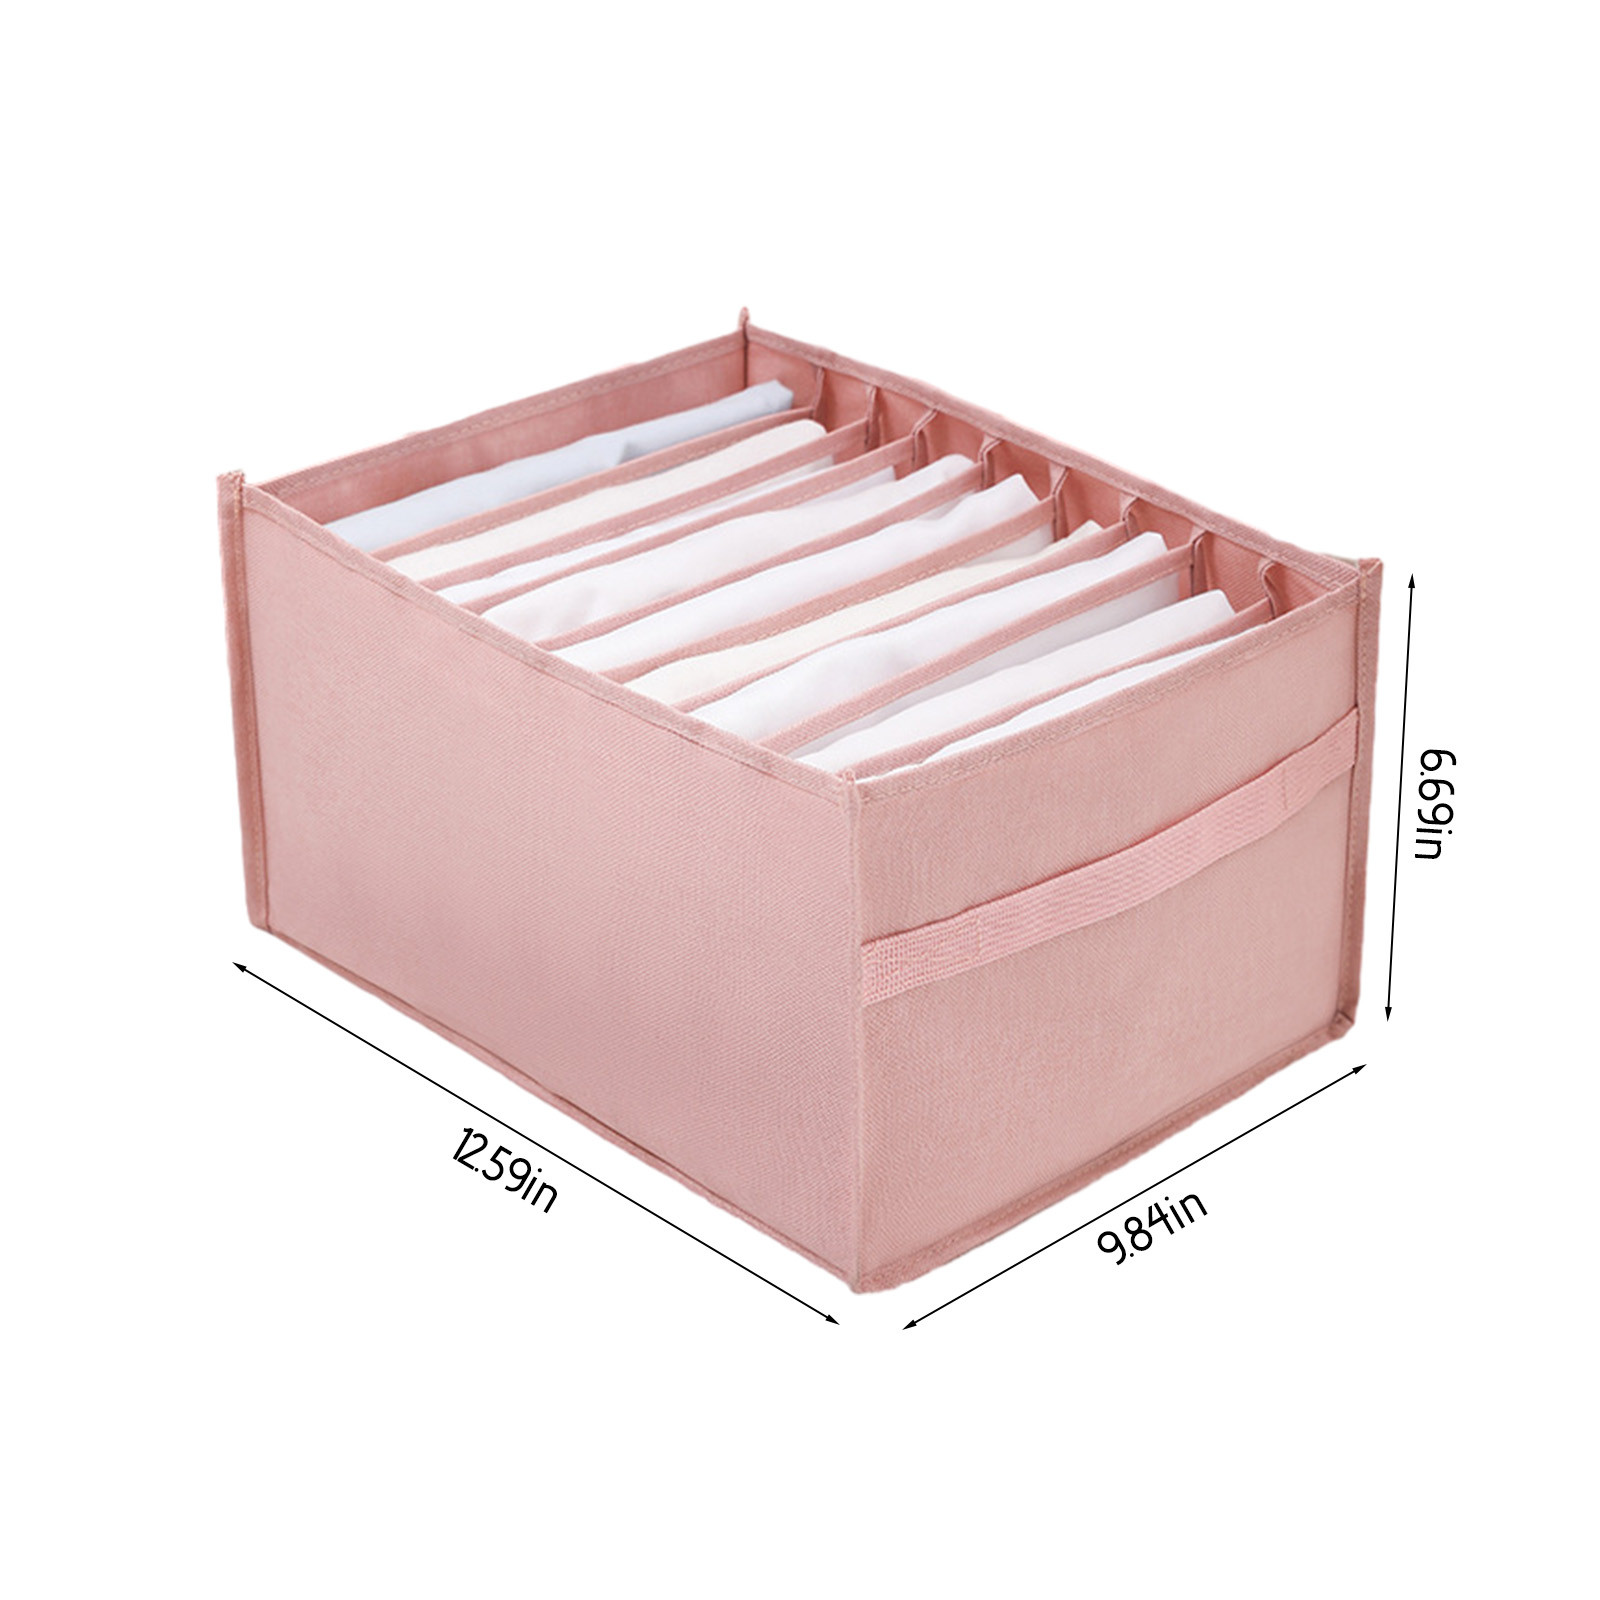 TOPRenddon Clothing Organizer,With Handles, Foldable Fabric Drawer ...